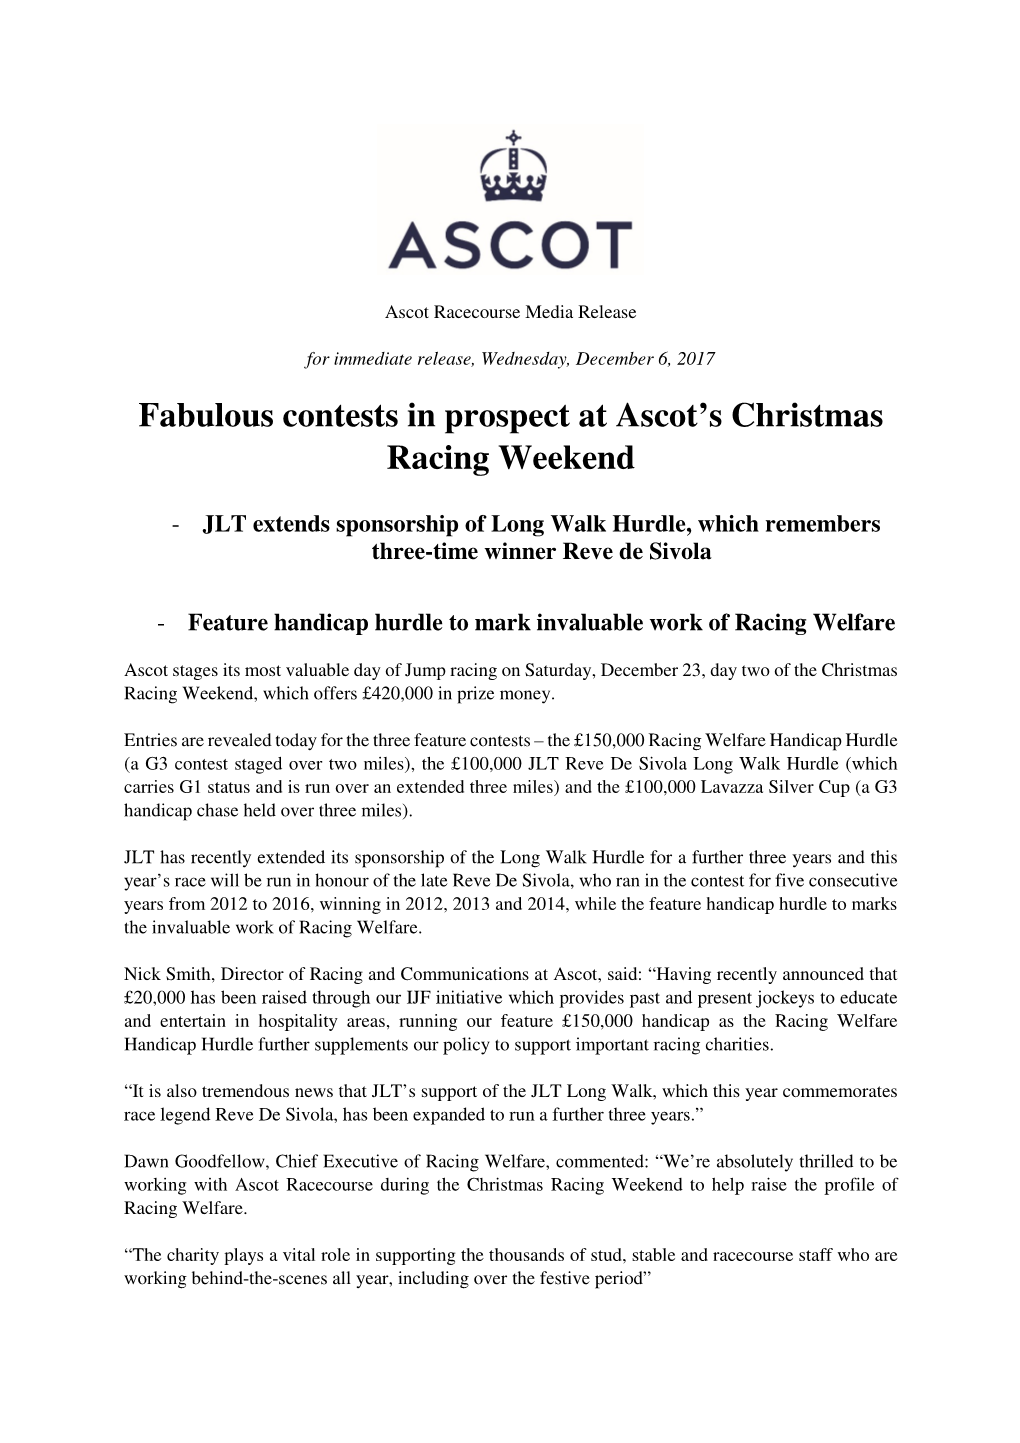 Fabulous Contests in Prospect at Ascot's Christmas Racing Weekend